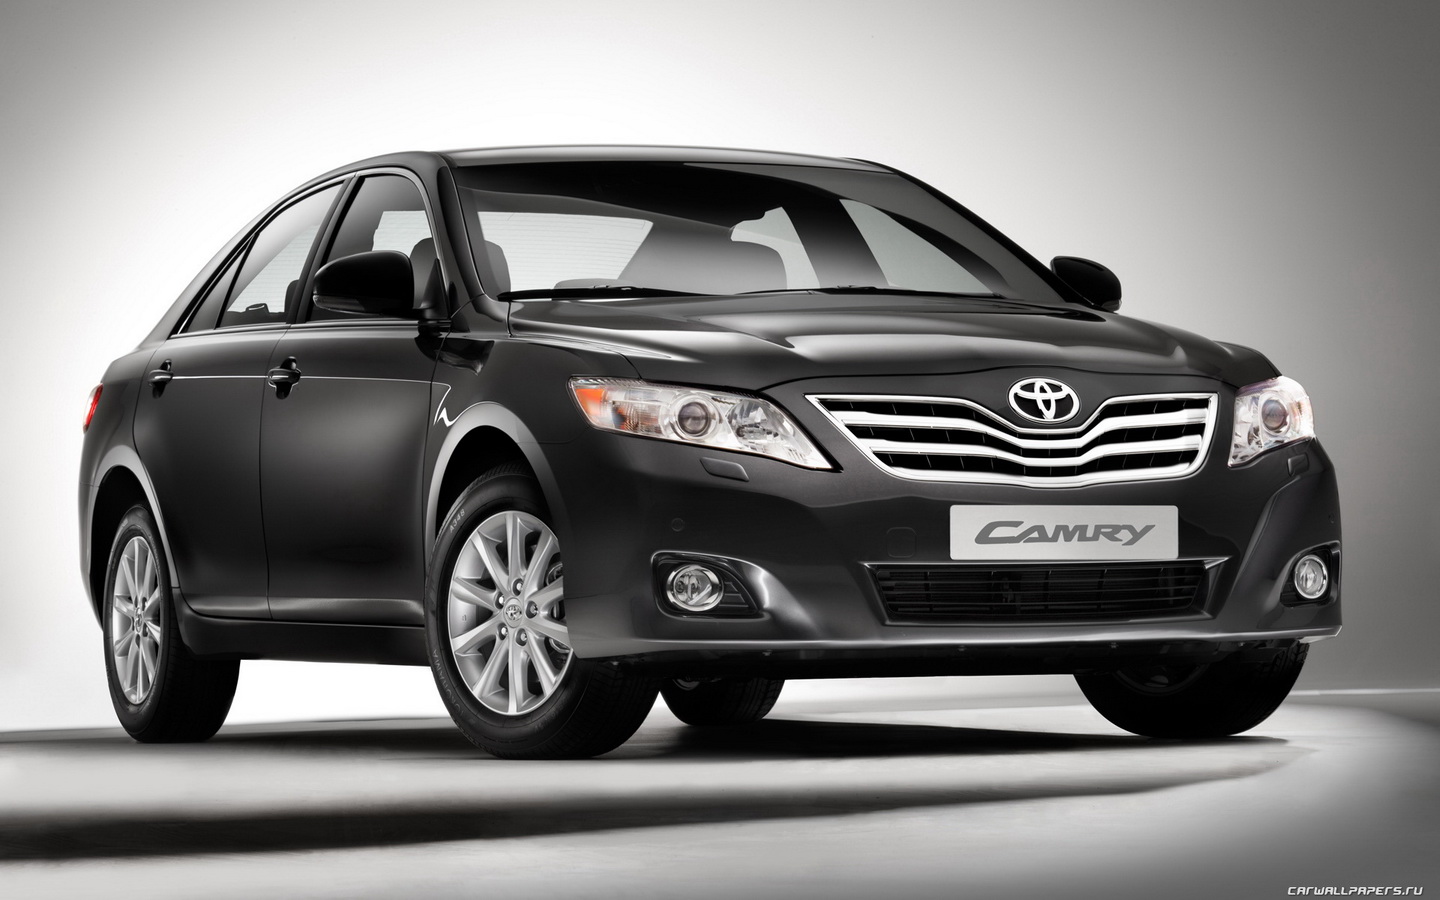 Toyota Camry Hybrid 2014 for India